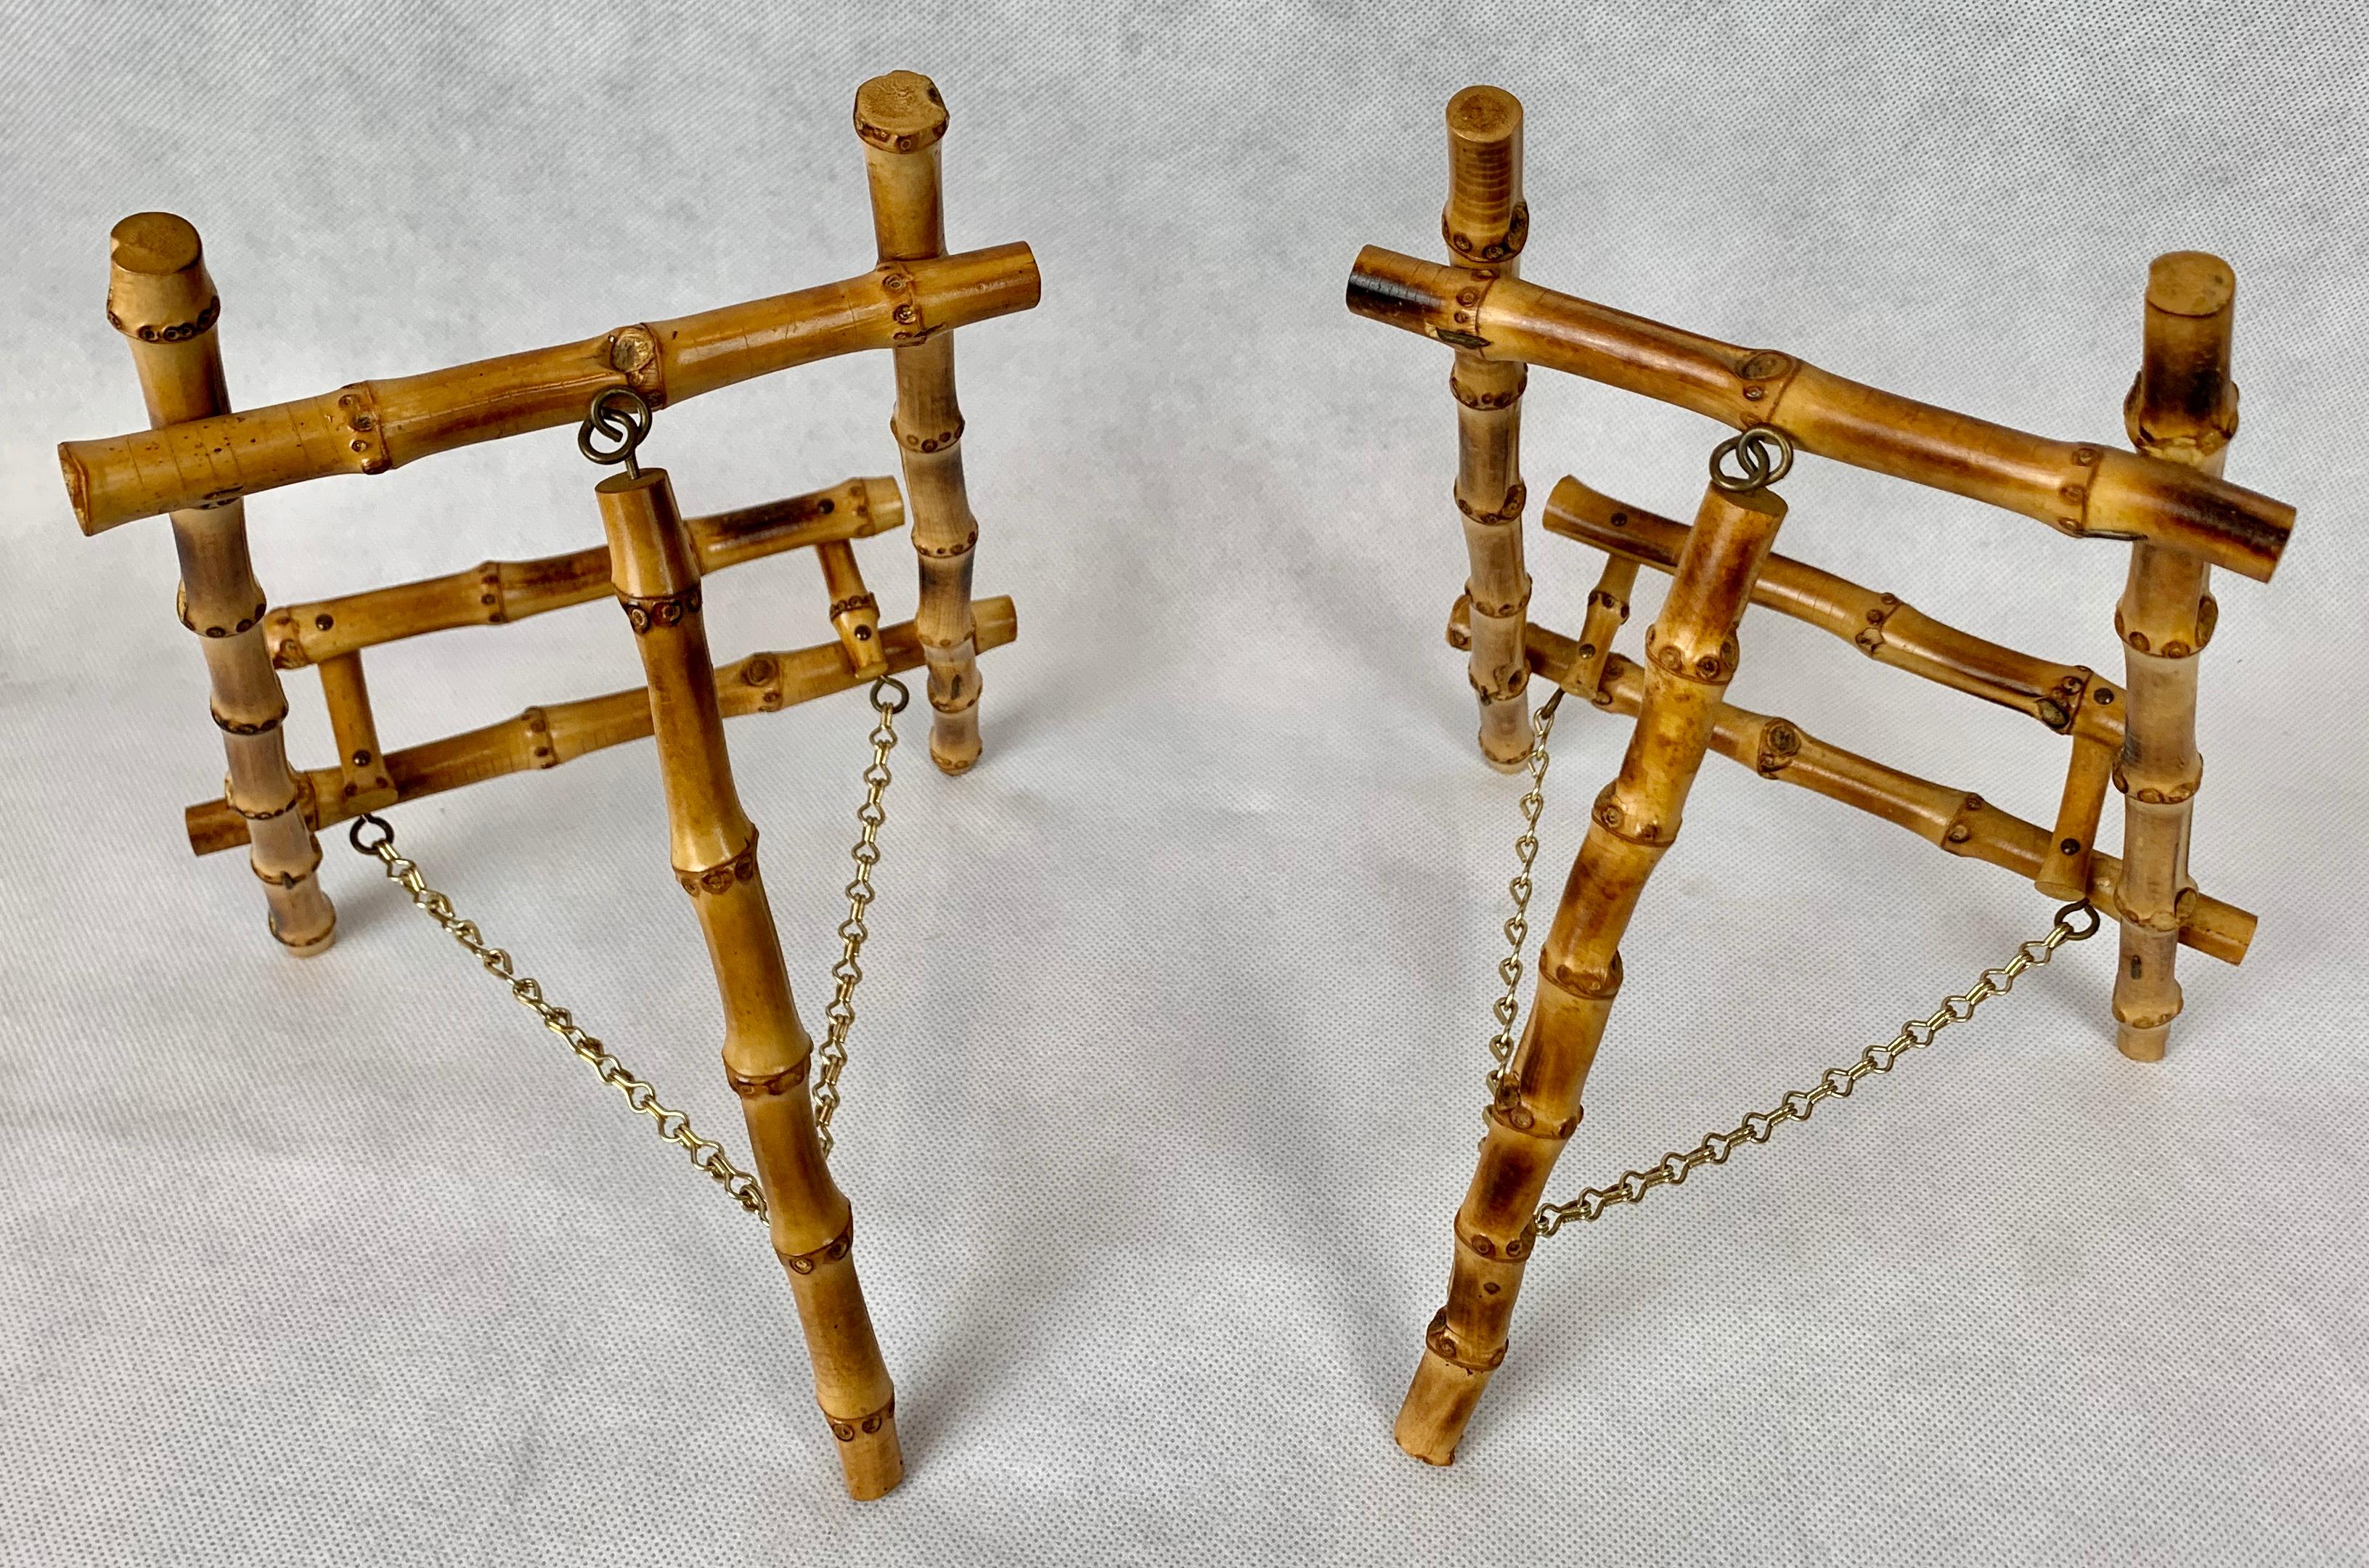 Hand-Crafted Pair of Midcentury Bamboo Easels with Brass Chains